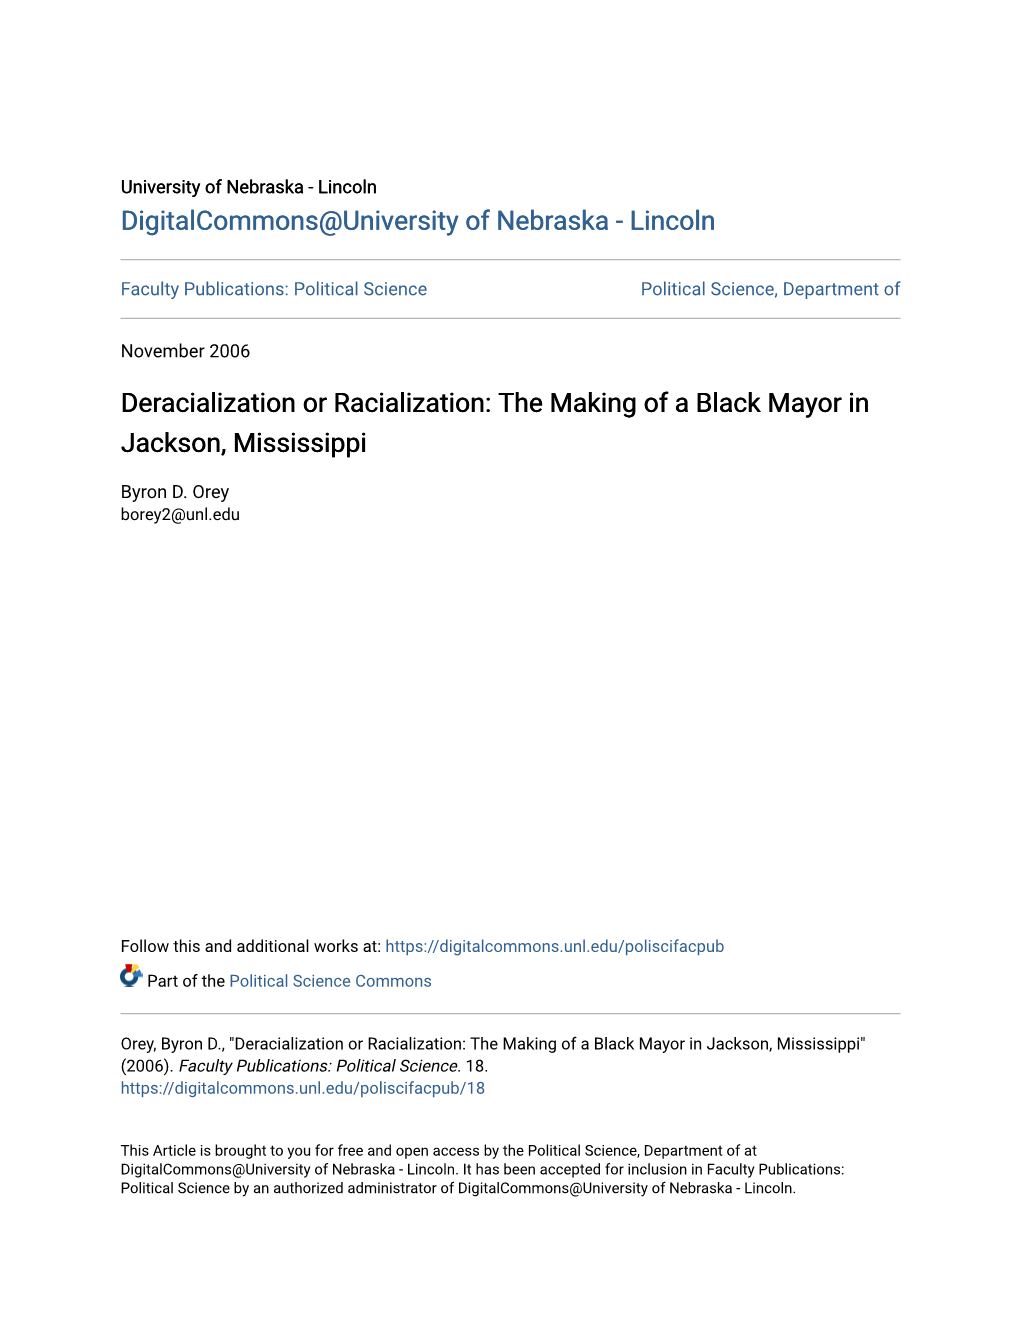 Deracialization Or Racialization: the Making of a Black Mayor in Jackson, Mississippi